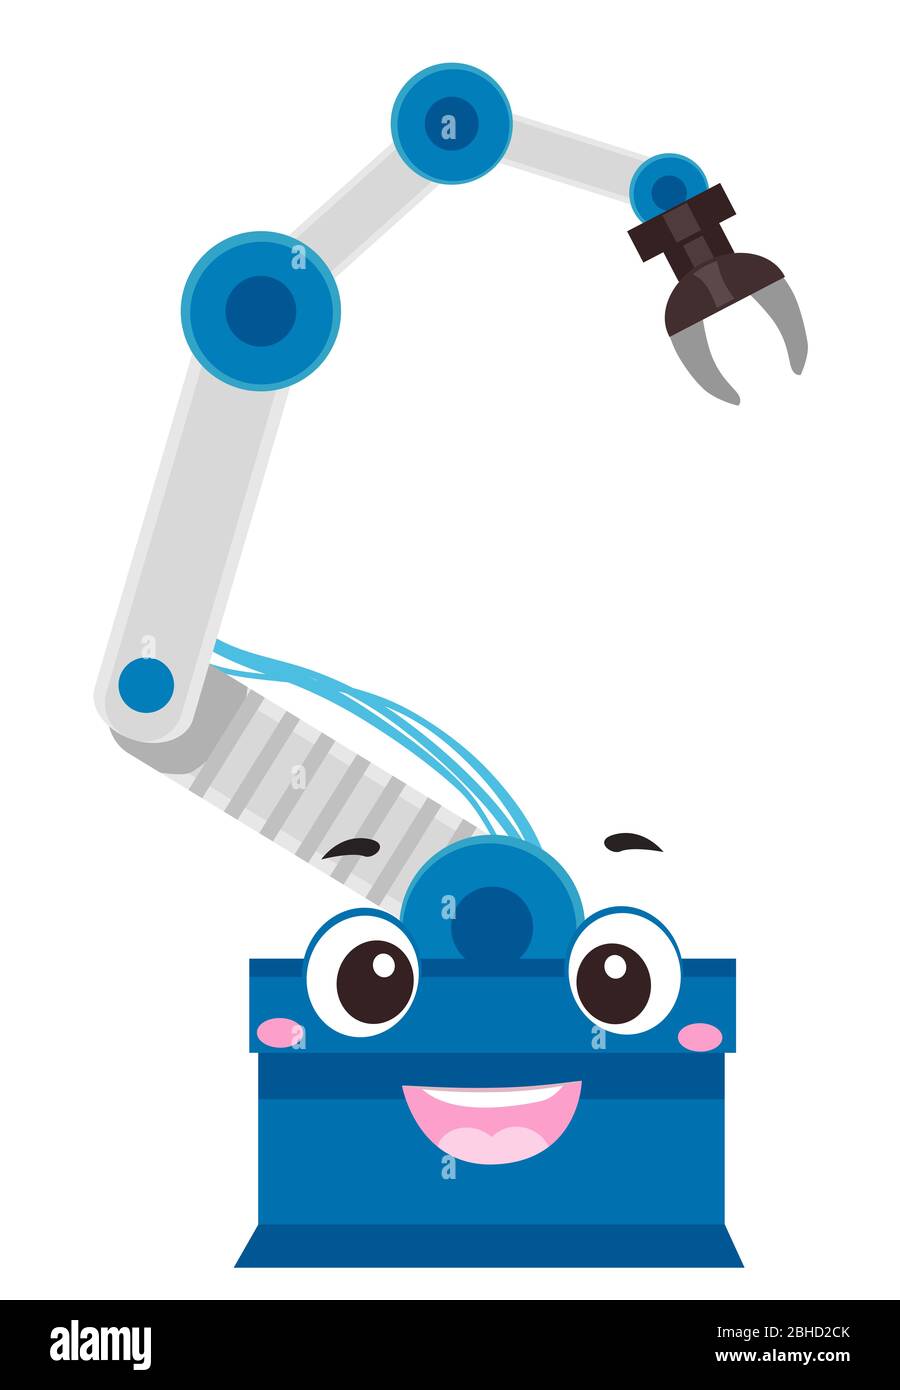 Illustration of a Robot Arm Mascot Smiling and Showing Its One Hand Stock Photo